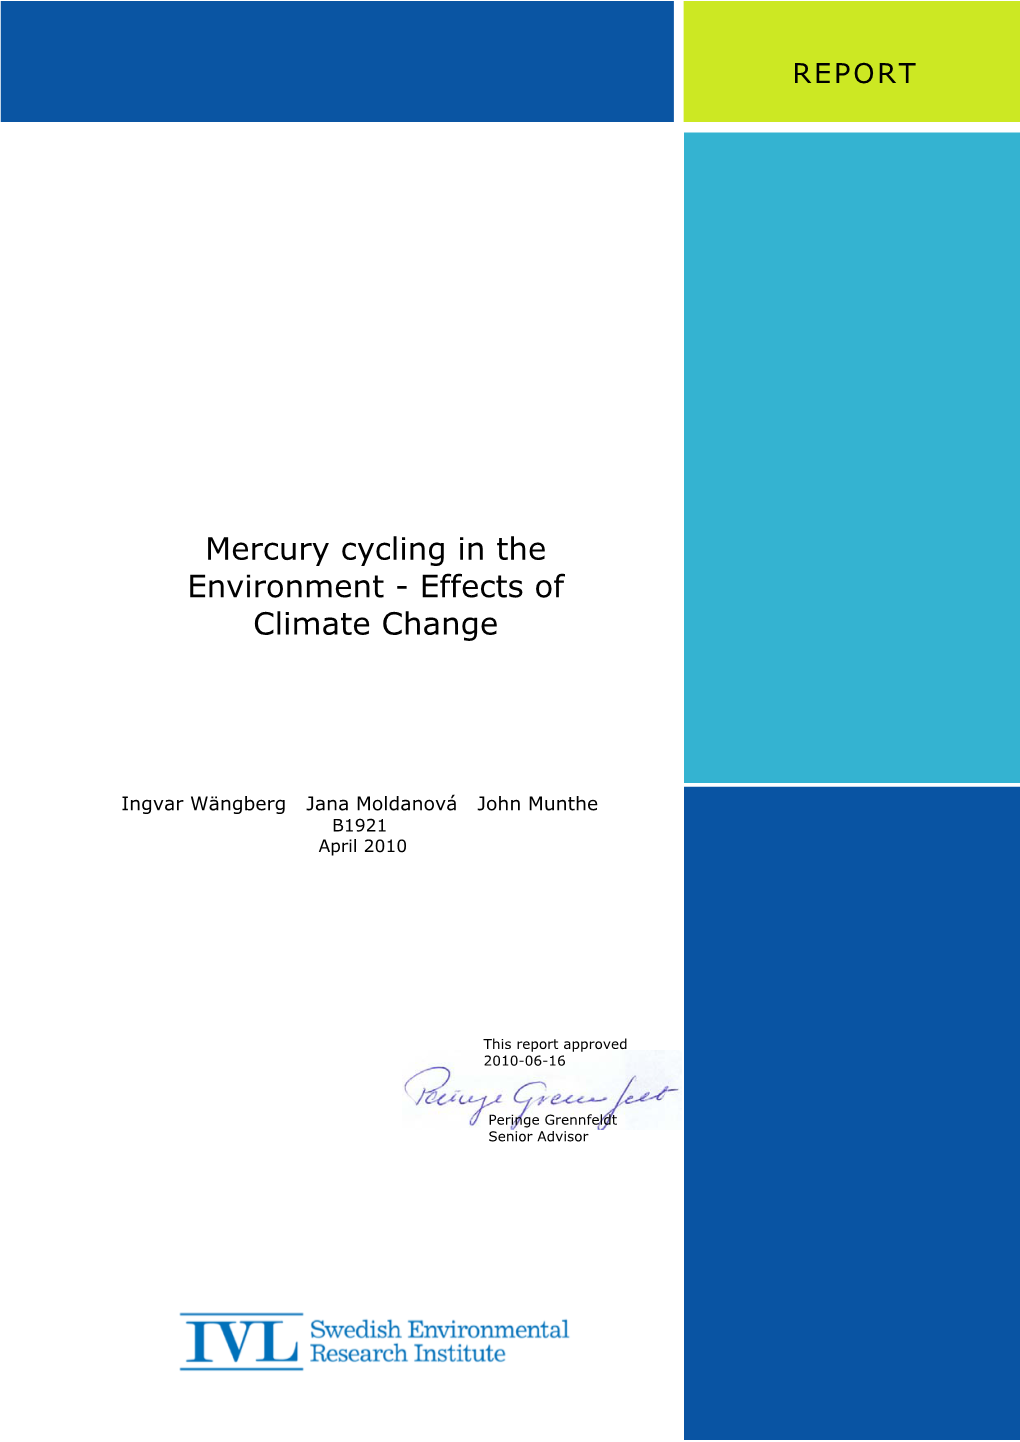 Mercury Cycling in the Environment - Effects of Climate Change